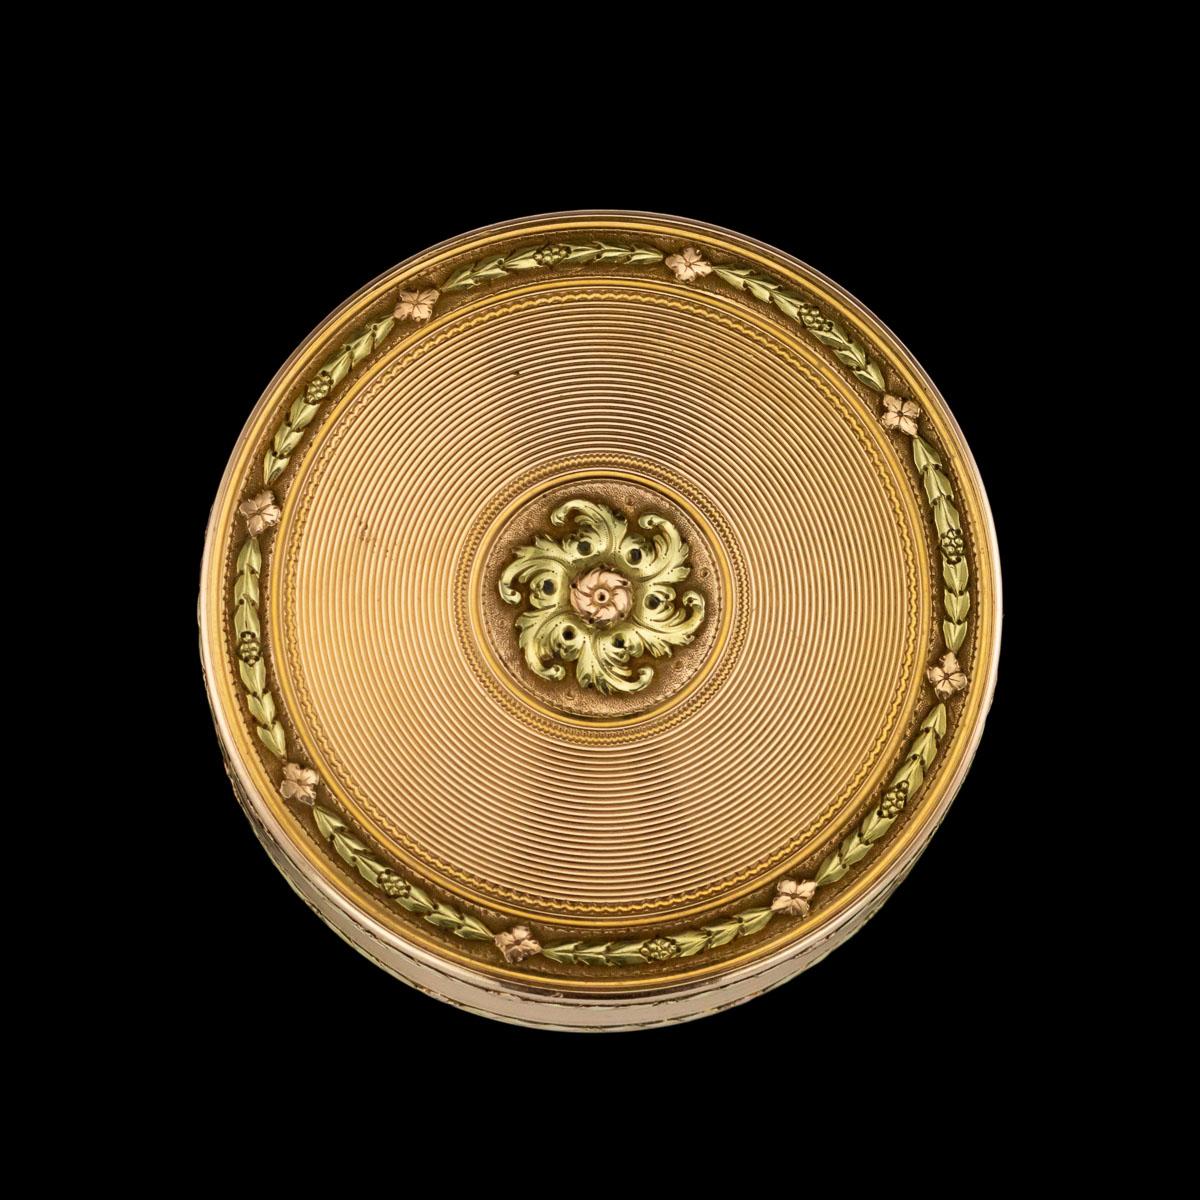 Antique 18th century French magnificent three-colored 18-karat gold snuff box / bonbonniere, of round form, engine turned decoration, the cover and base centred with vari-color gold rosette, edges chased with flowers and husk garlands on a matted